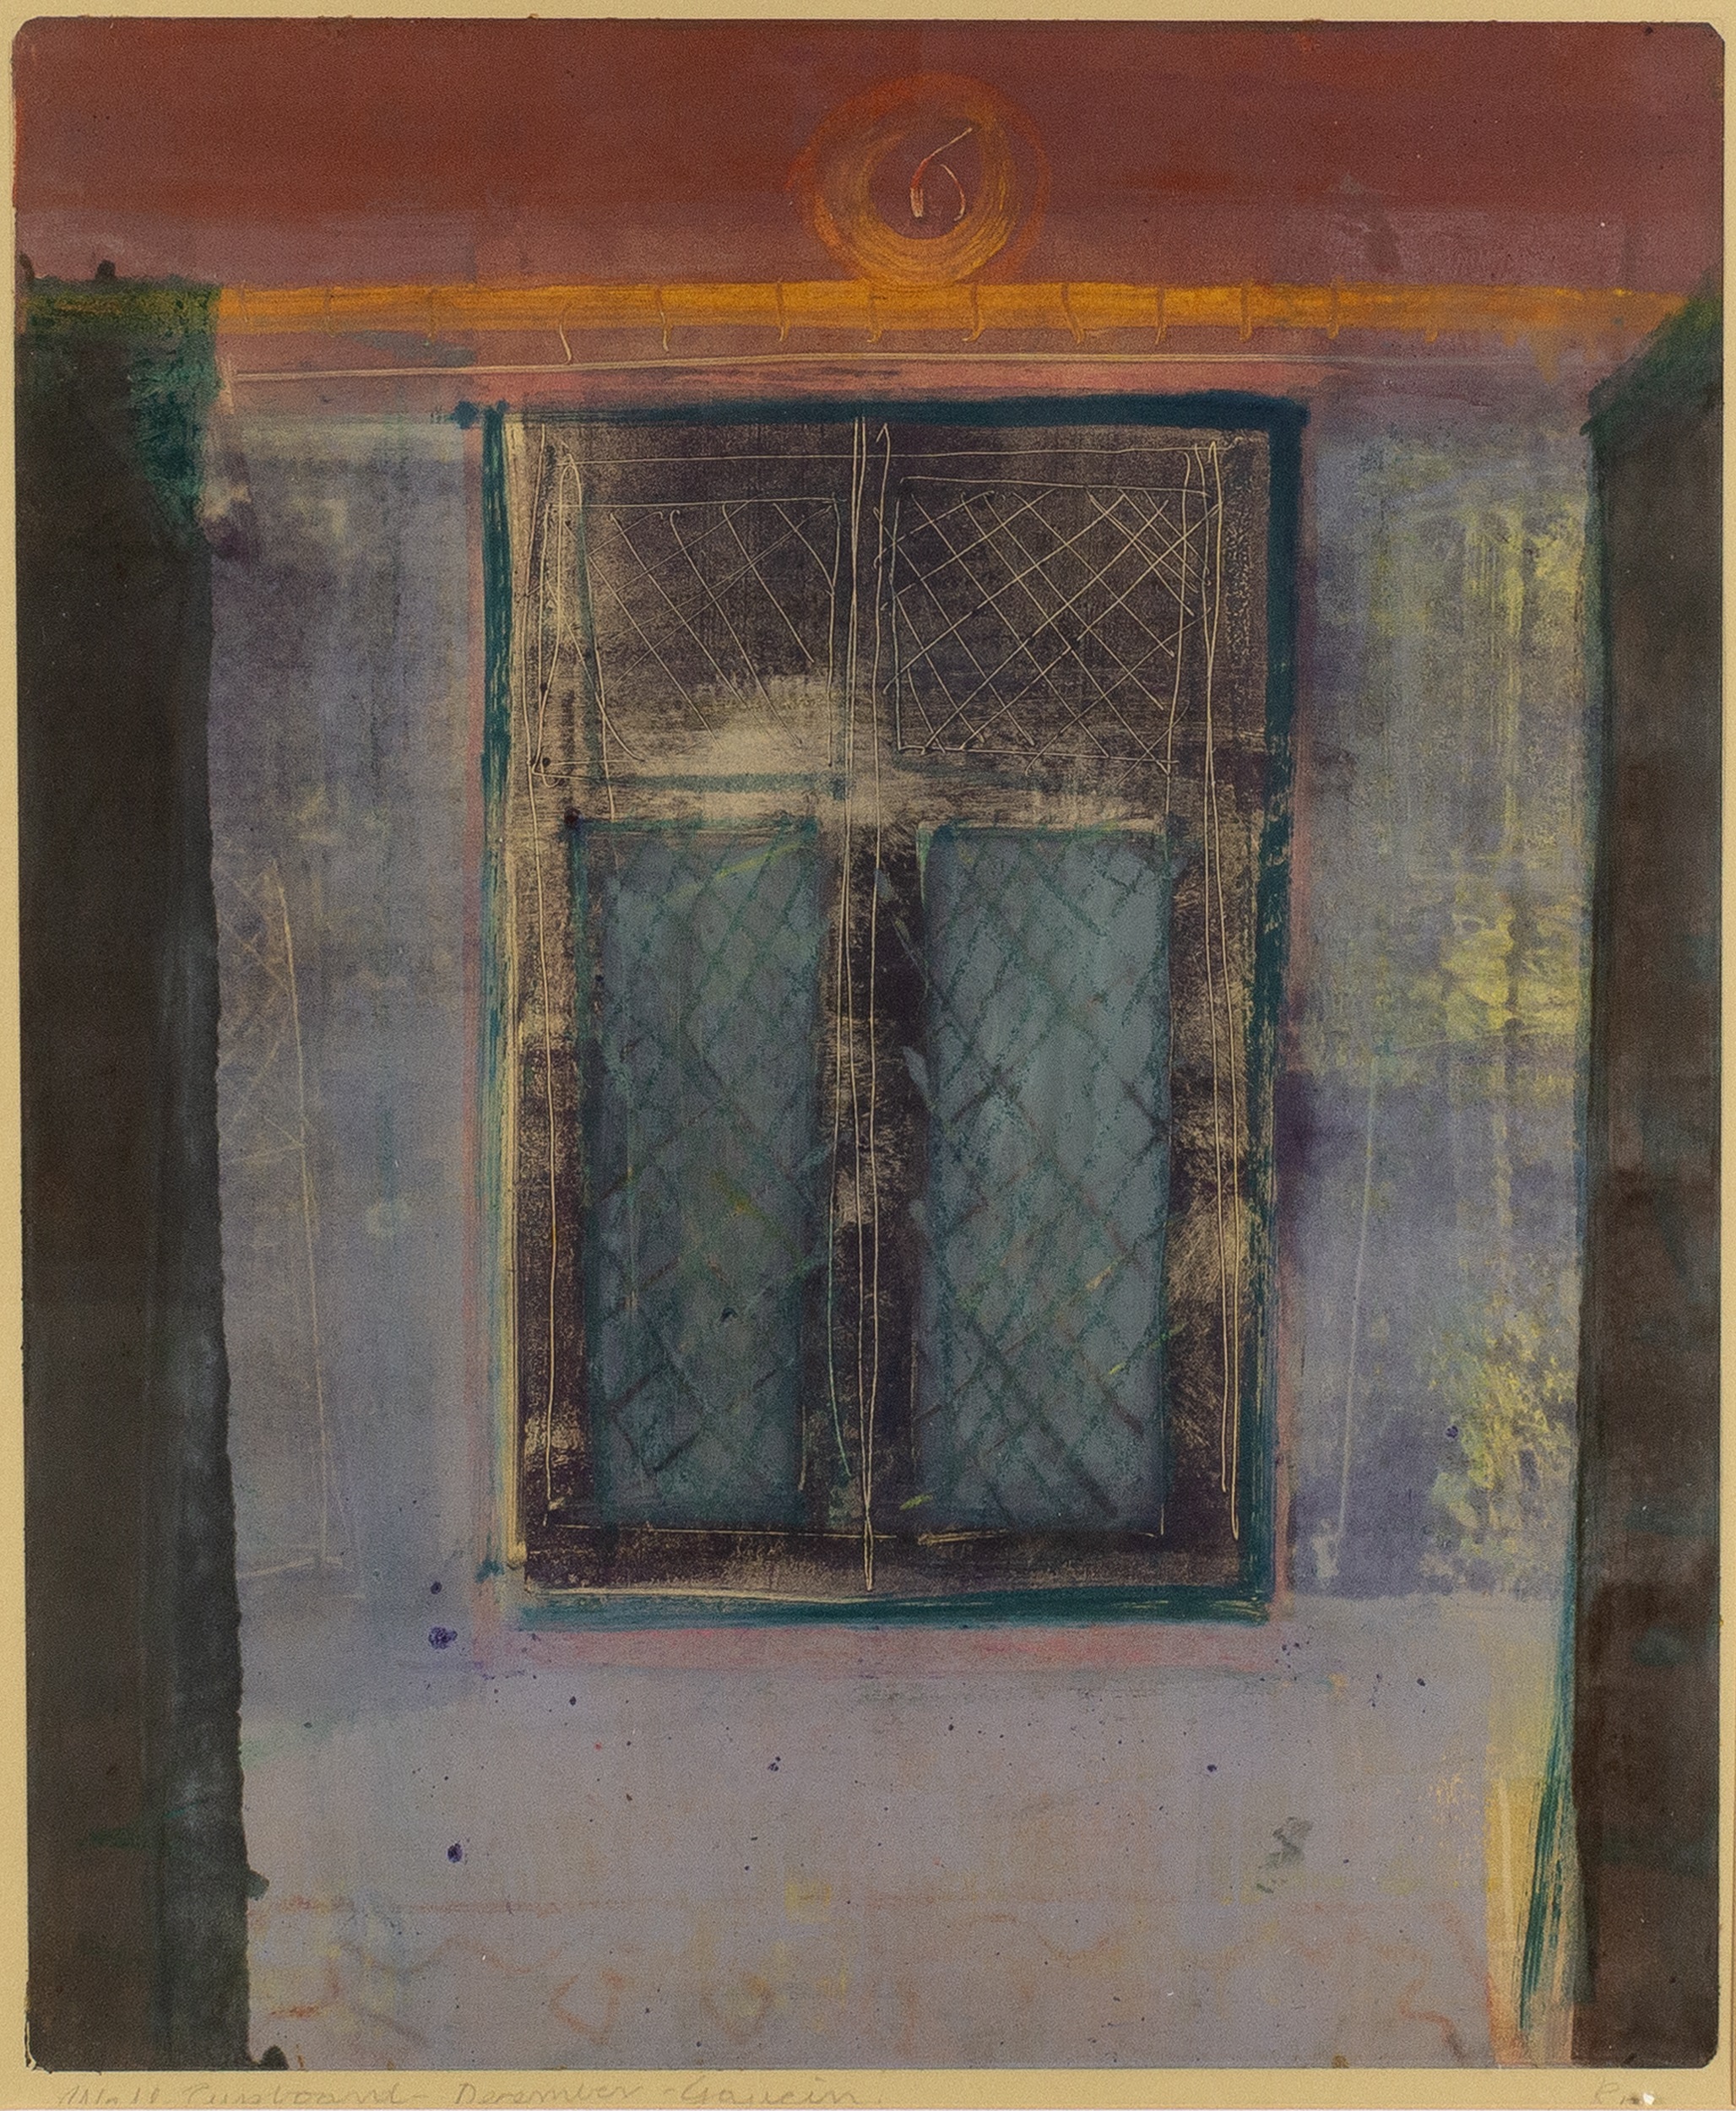 Barbara Rae (b.1943) Wall Cupboard, December, Gaucin signed and titled in pencil (in the margin)